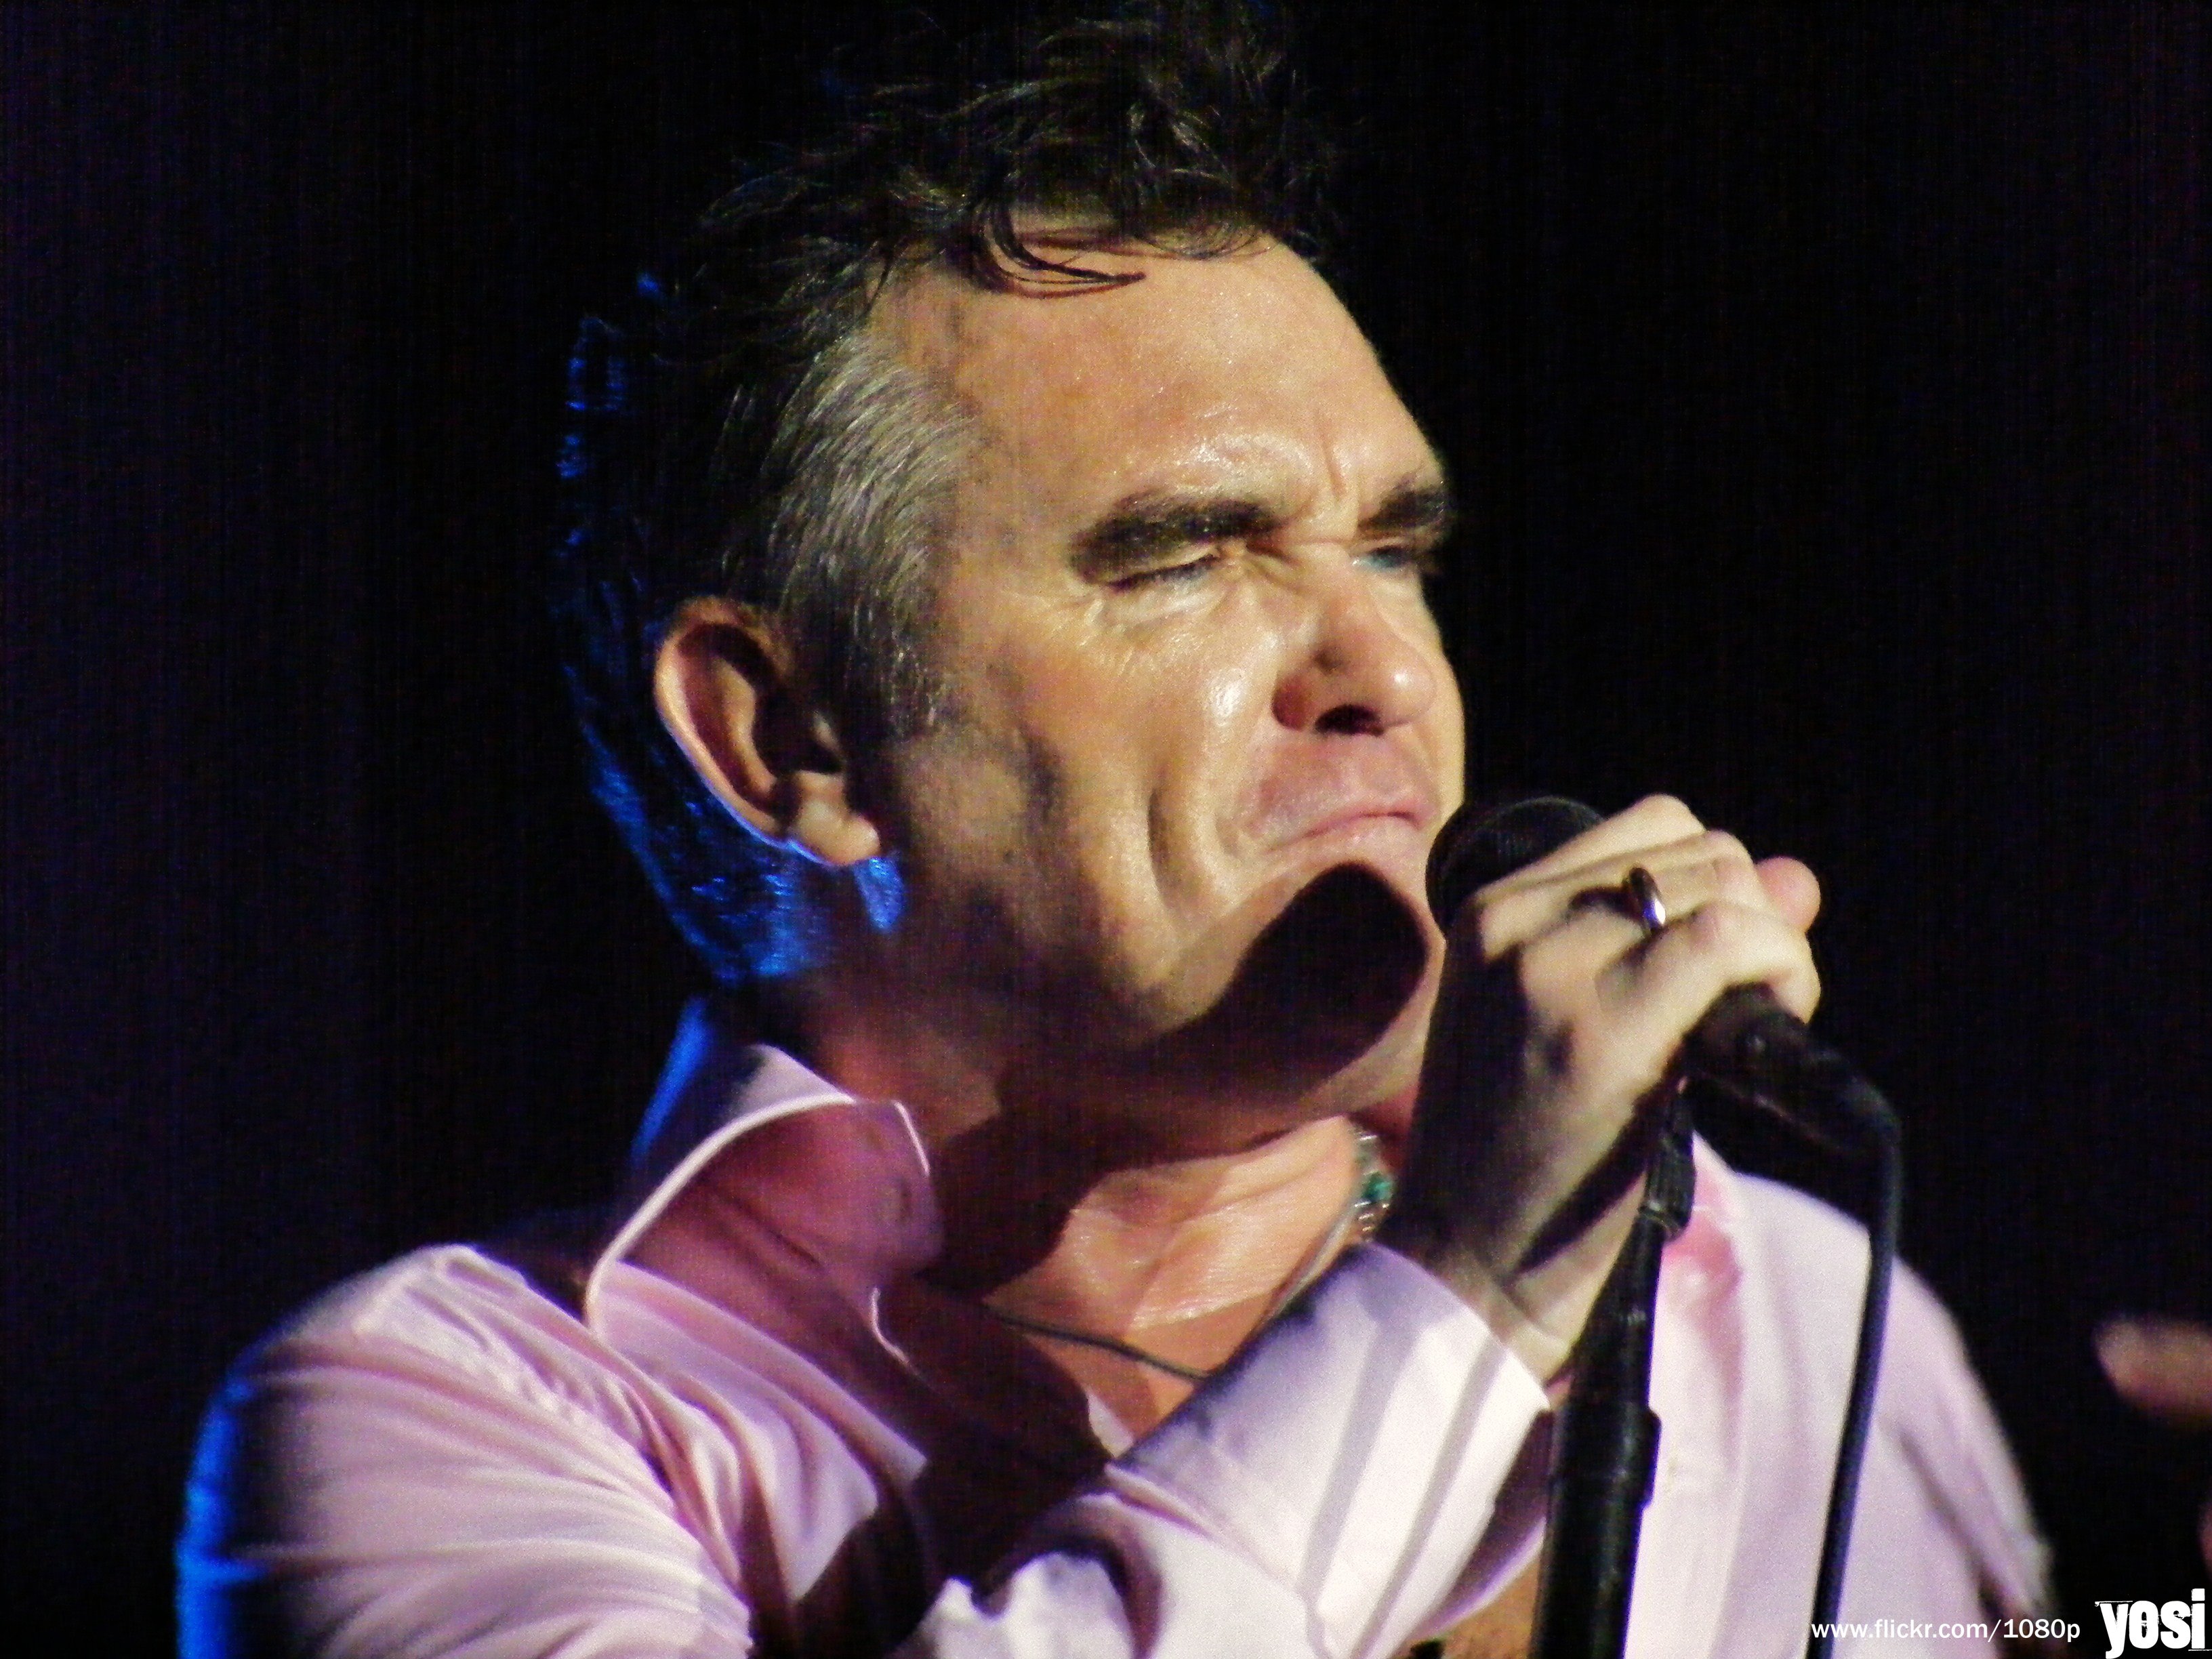 Morrissey uses images of Catalan referendum attacks in his world tour